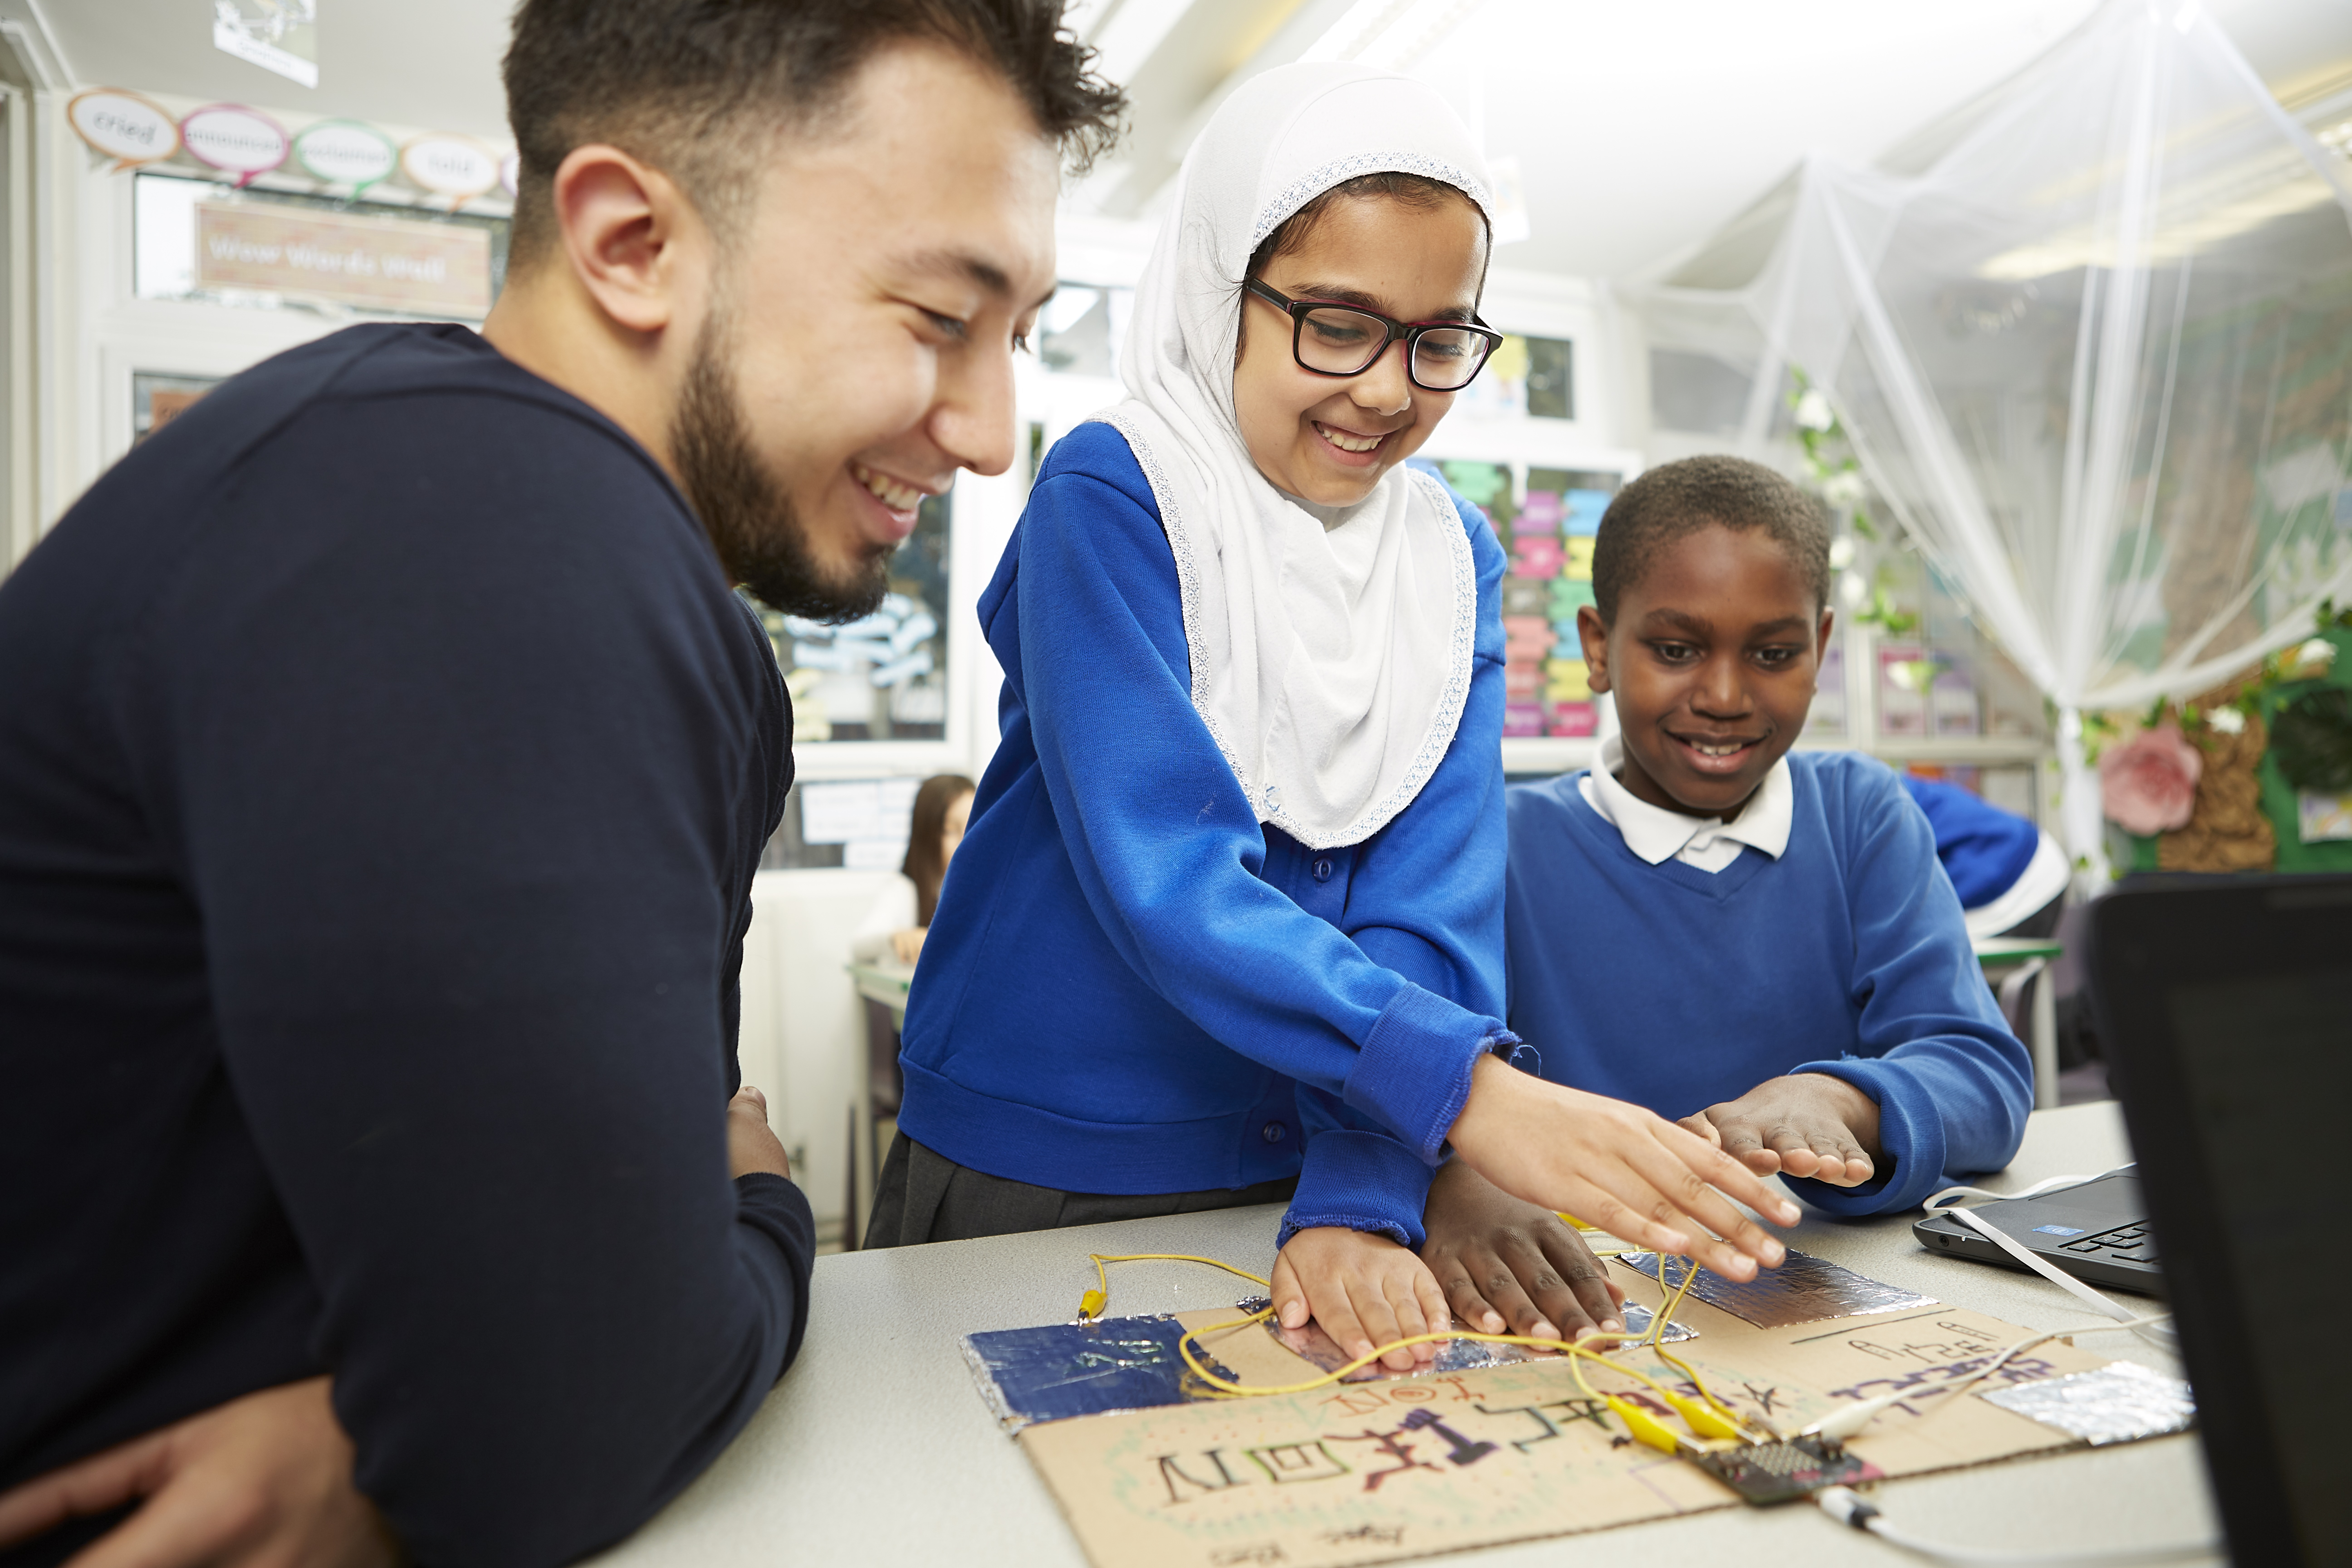 A young man supervises two children doing an engineering activity.